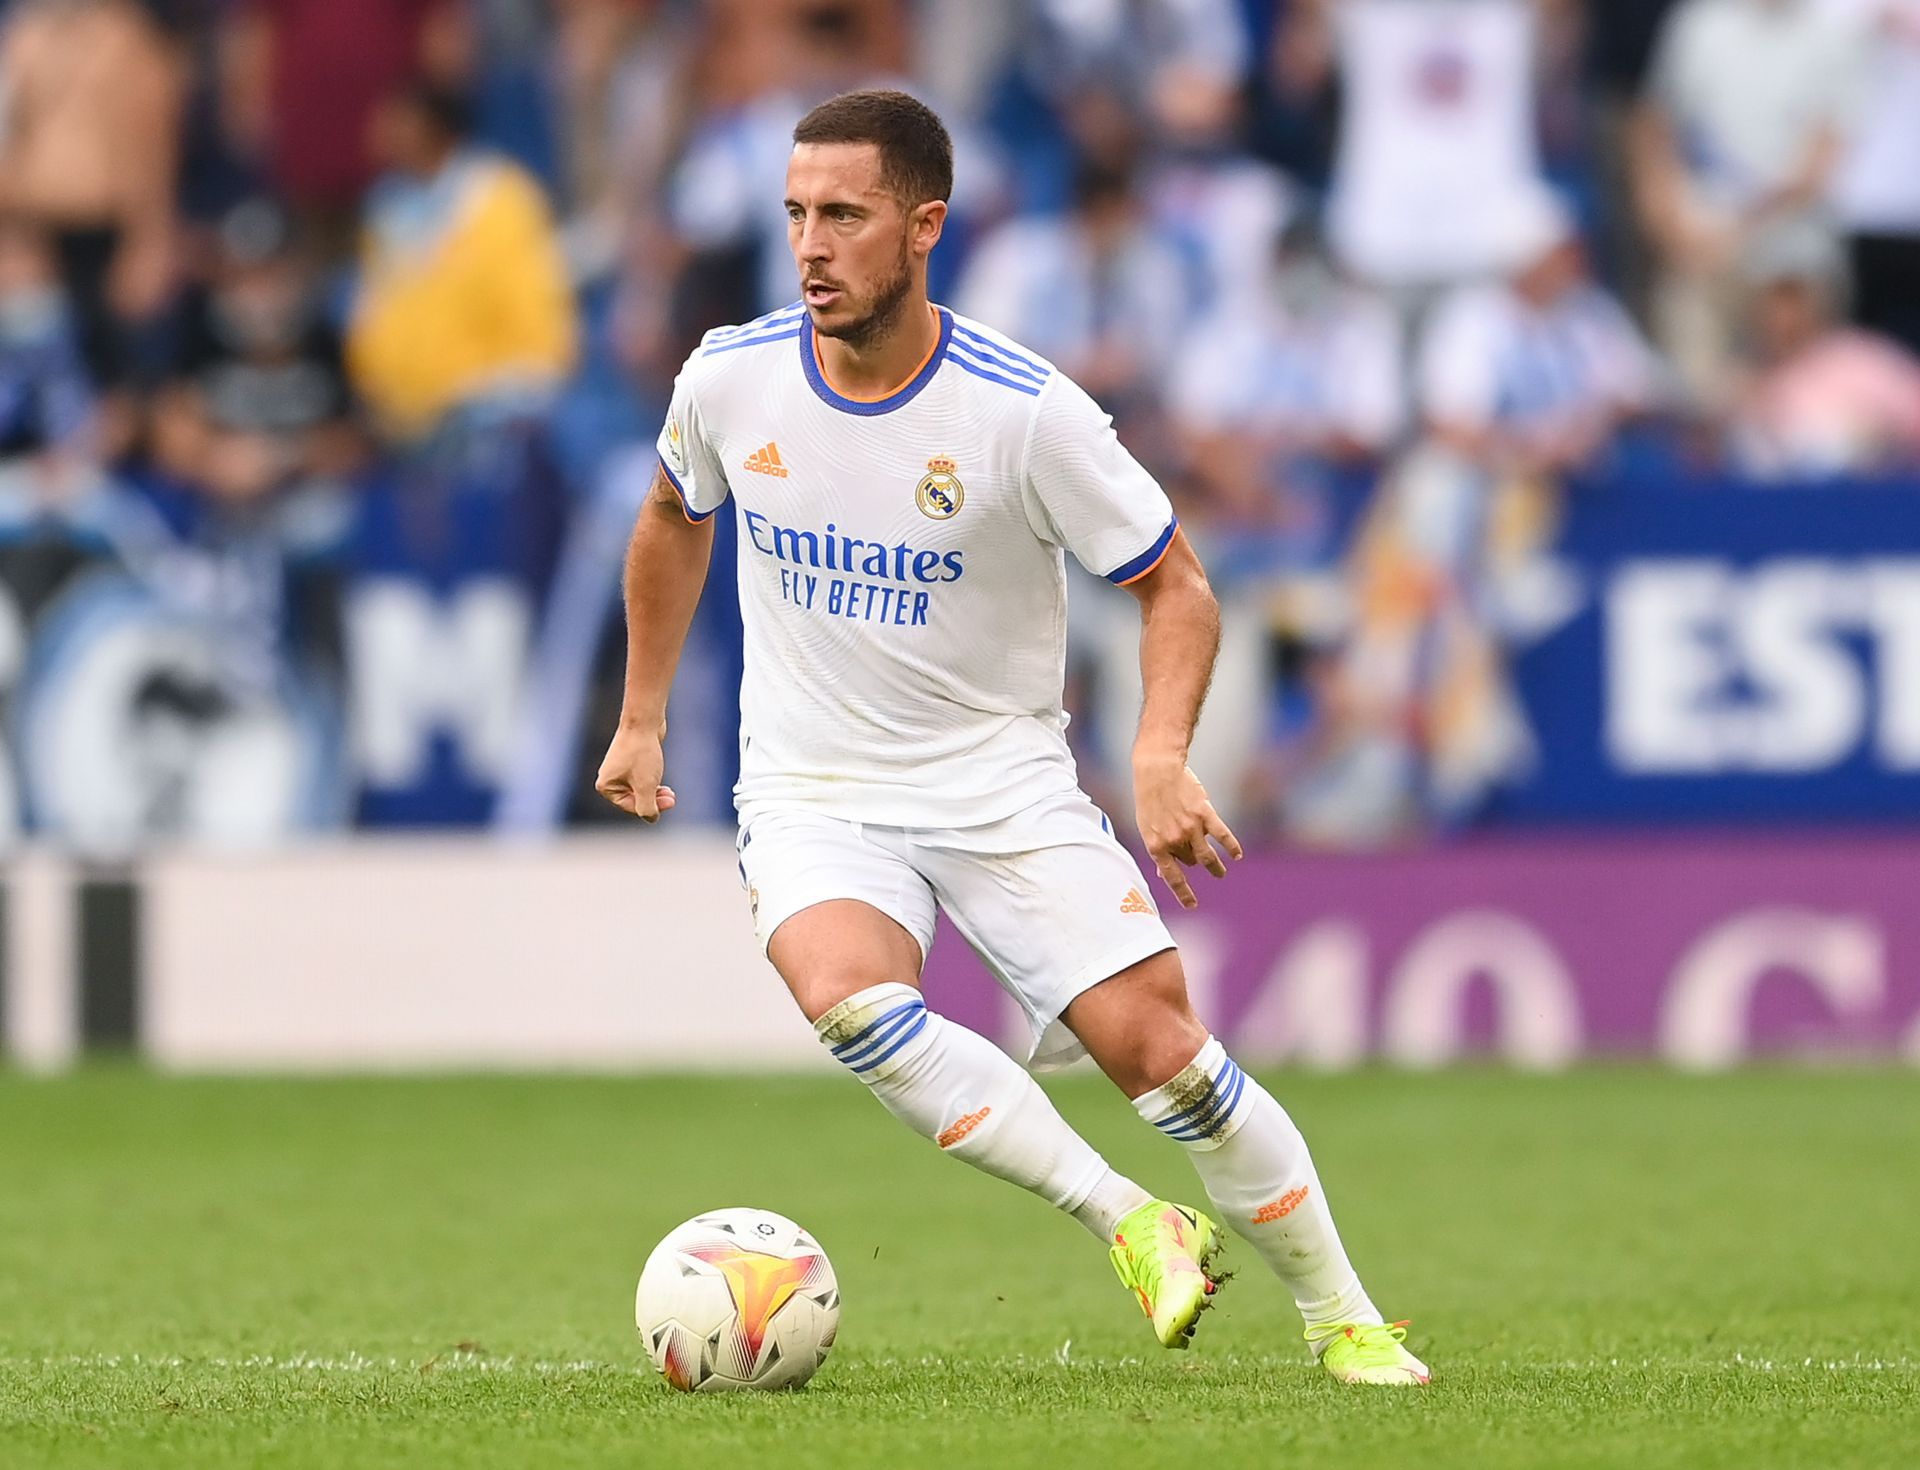 Eden Hazard has failed to replicate his Chelsea-form a Real Madrid